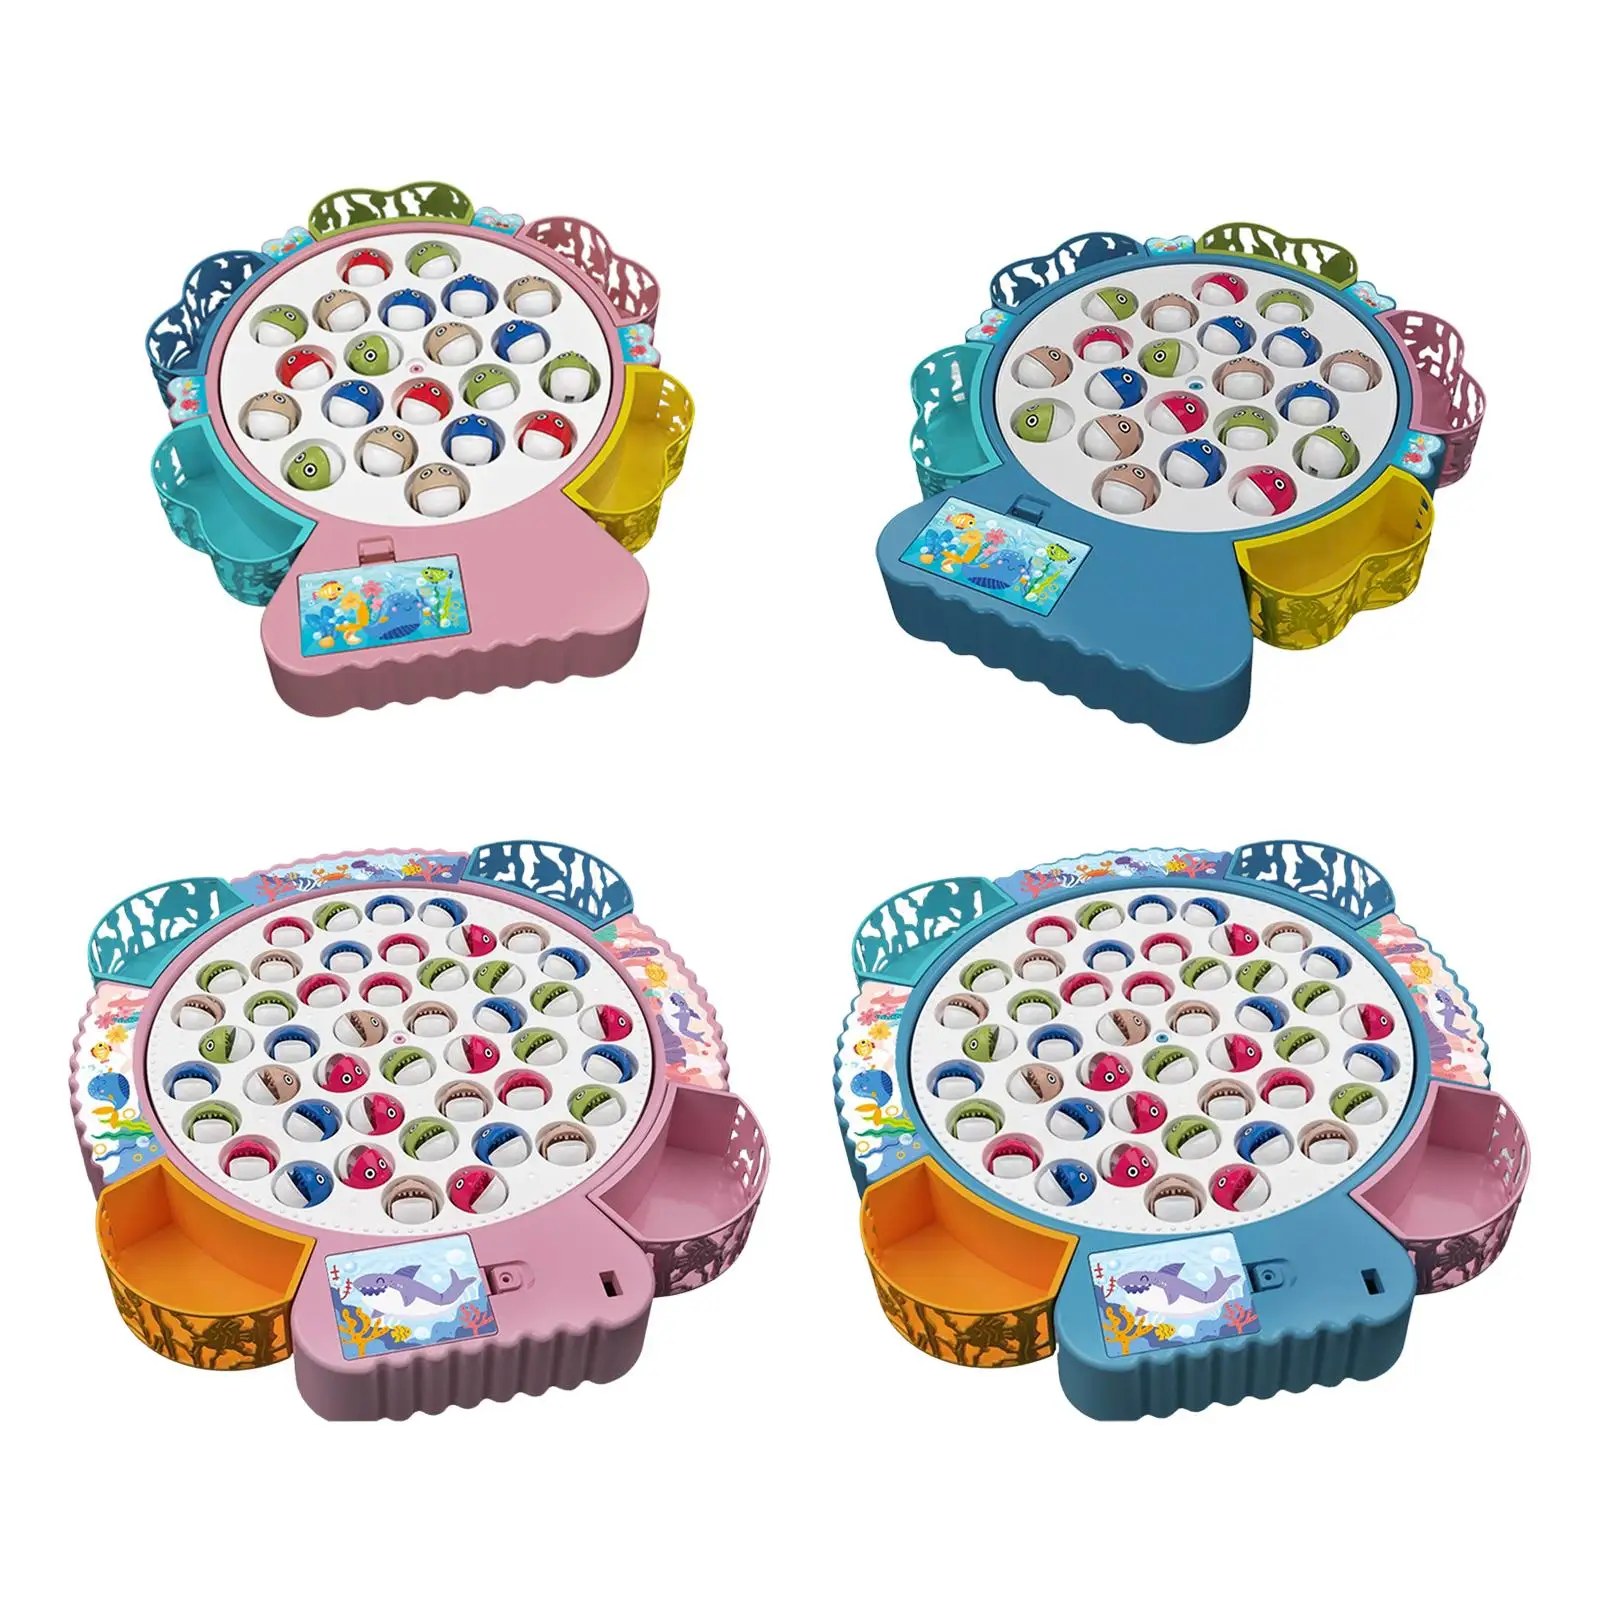 Rotating Fishing Game with 4 Fishing Poles Colorful Fine Motor Skills for Family Toddlers Preschool Party Favors Age 3 and up